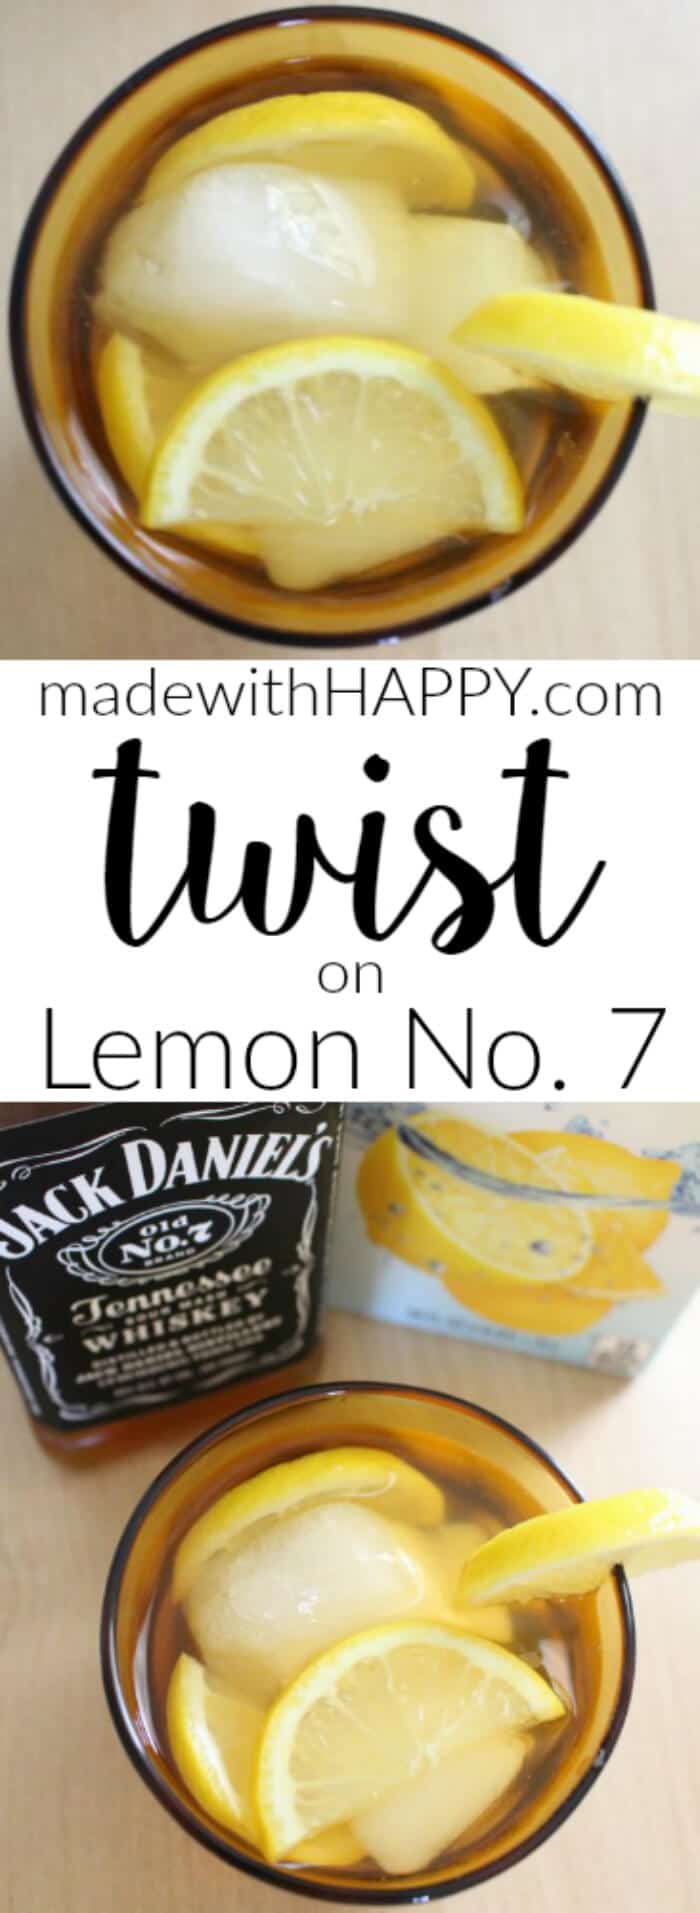 Lemon No. 7 Cocktail | Whiskey Lemonade Twist | Bachelor in Paradise Episode Recap | Week 2 of Bachelor in Paradise Drink Series |www.madewithhappy.com